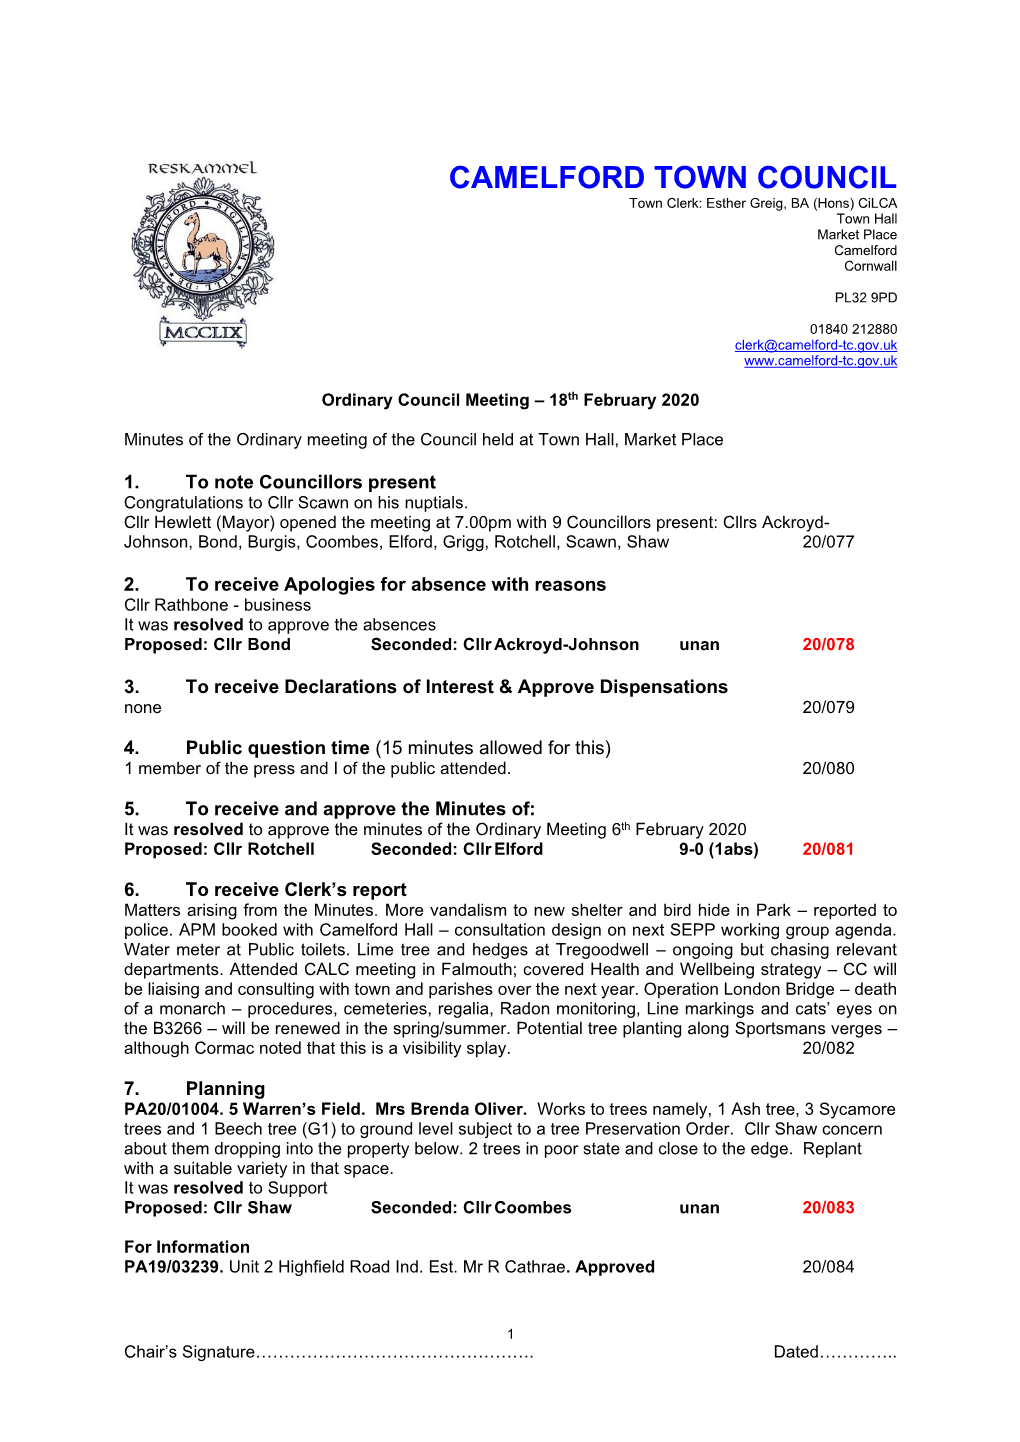 Download 18 February 2020 Minutes of the Council Meeting